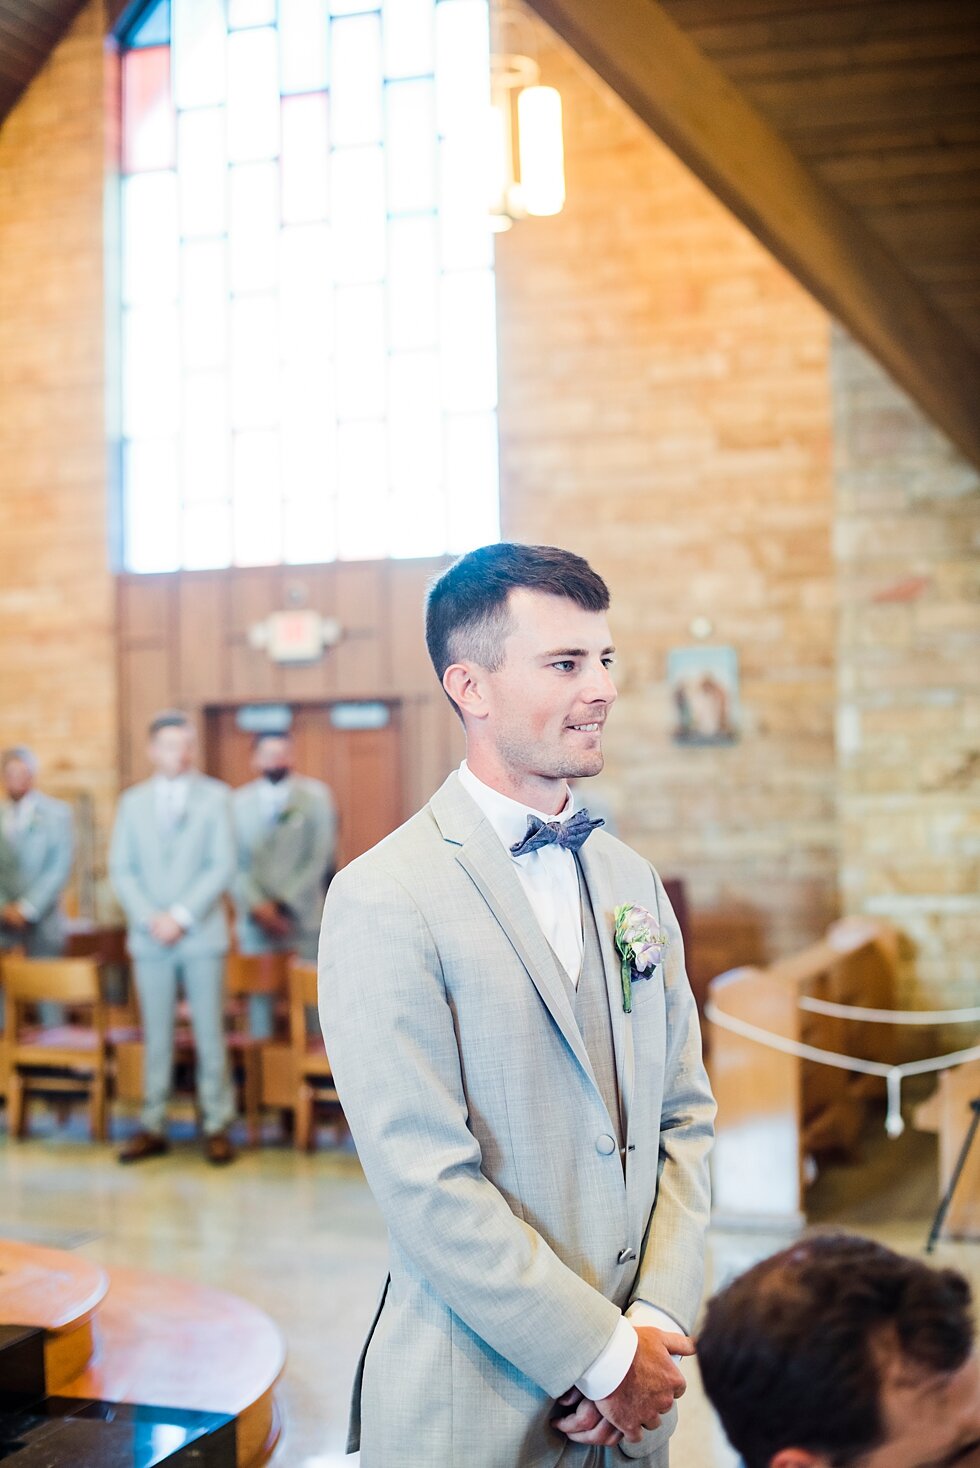  Groom waiting at the front of the wedding venue waiting for his bride to walk down the aisle with her father. wedding ceremony details stunning photography married midwest louisville kentucky #weddingphoto #love #justmarried #midwestphotographer #ky